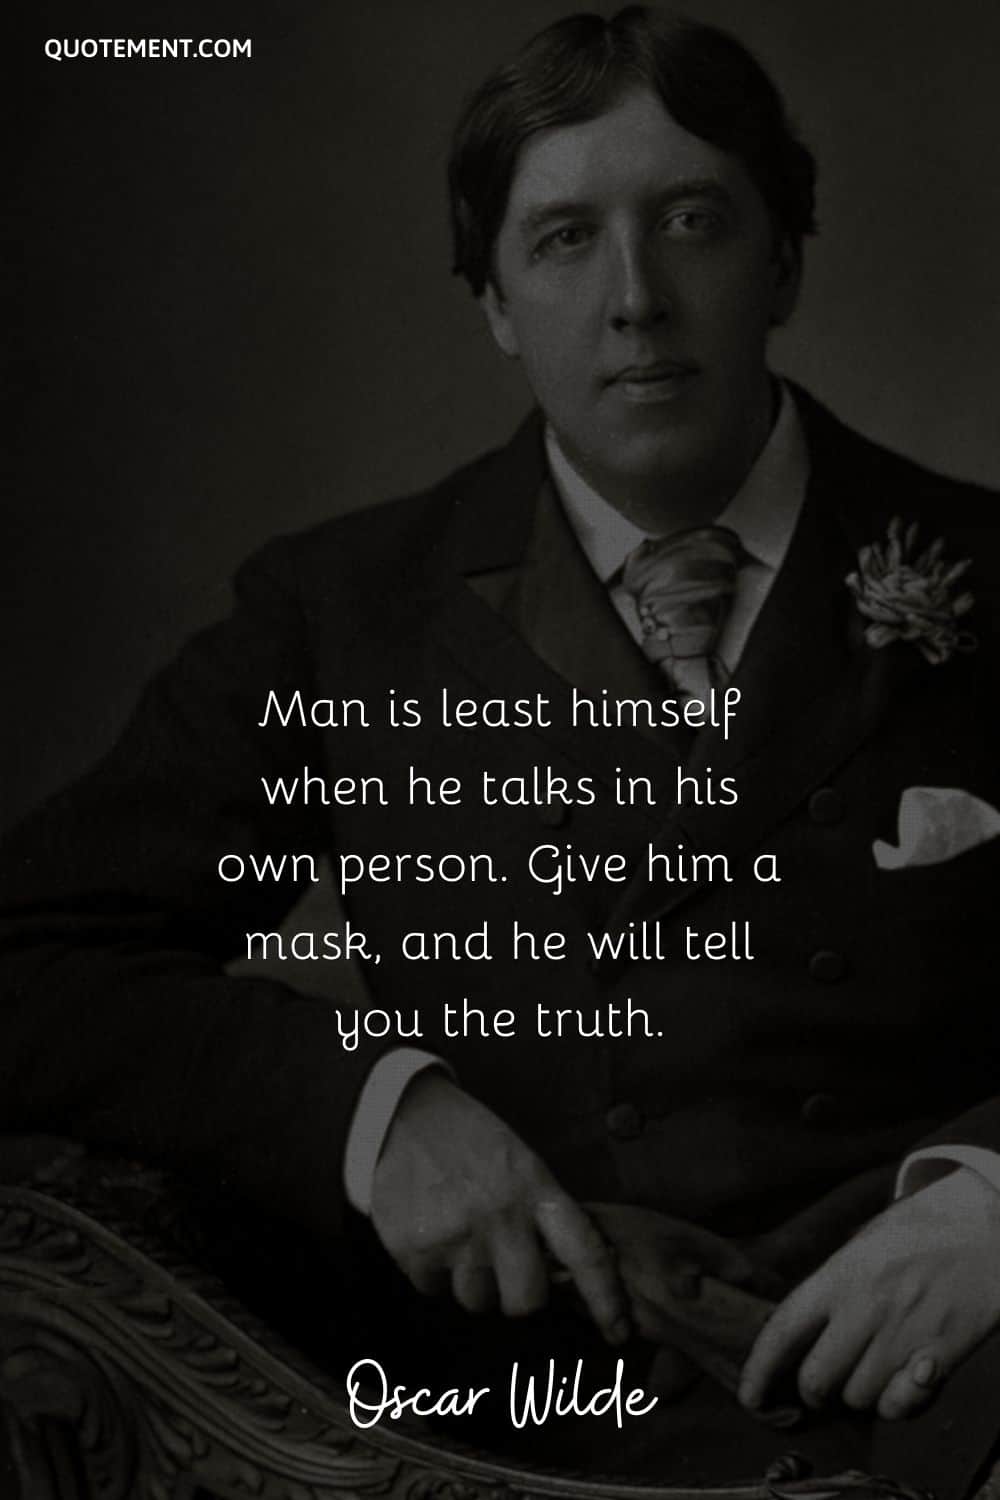 Man is least himself when he talks in his own person